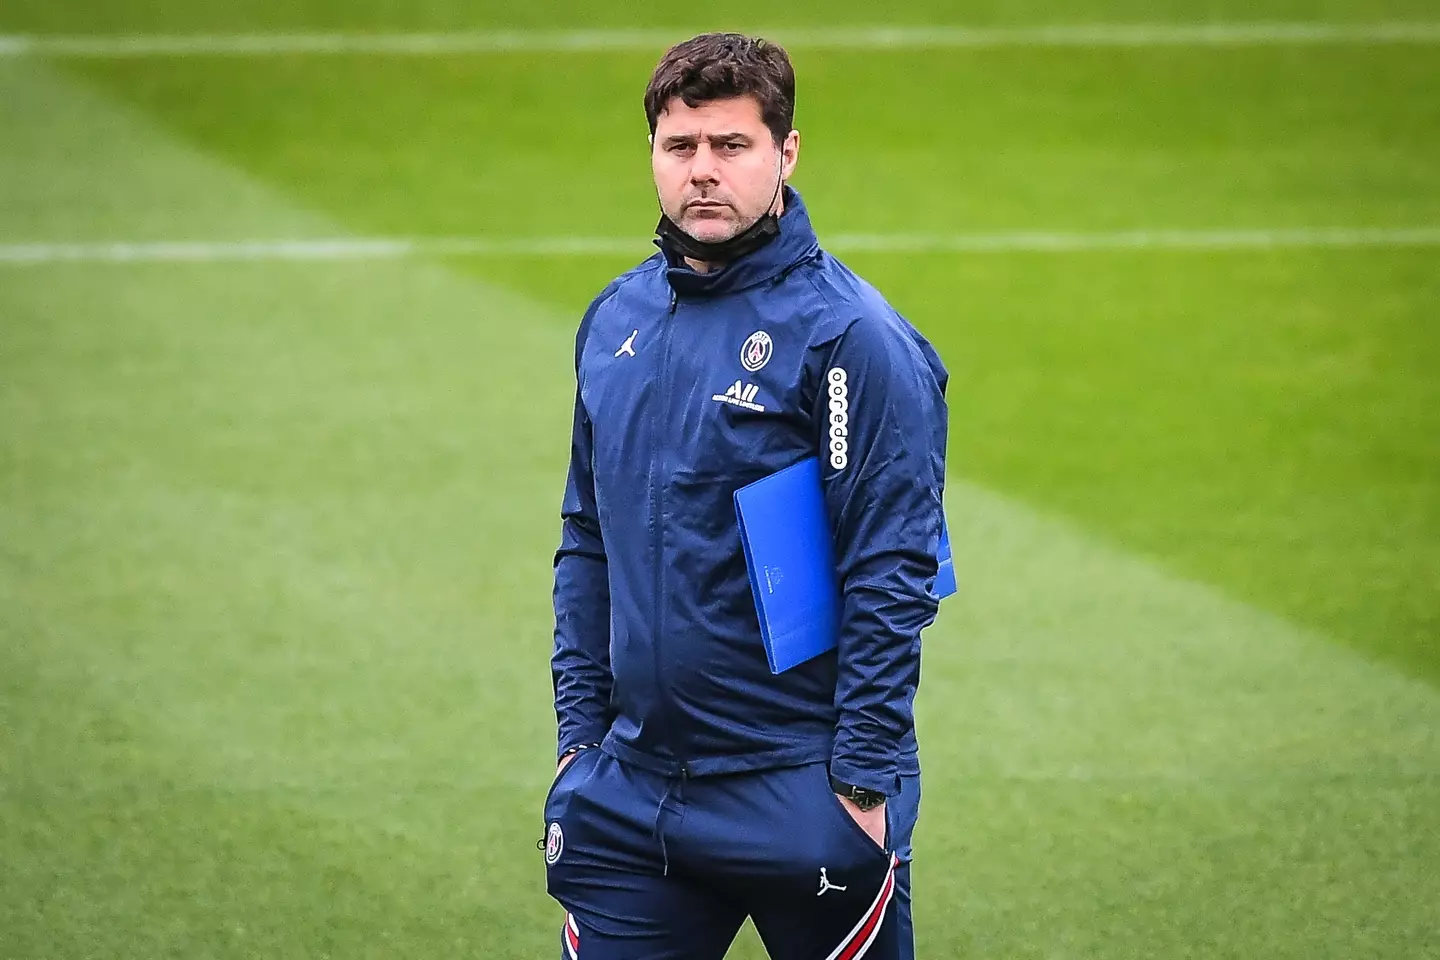 Pochettino is the number one target for United, according to reports. Image: PA Images